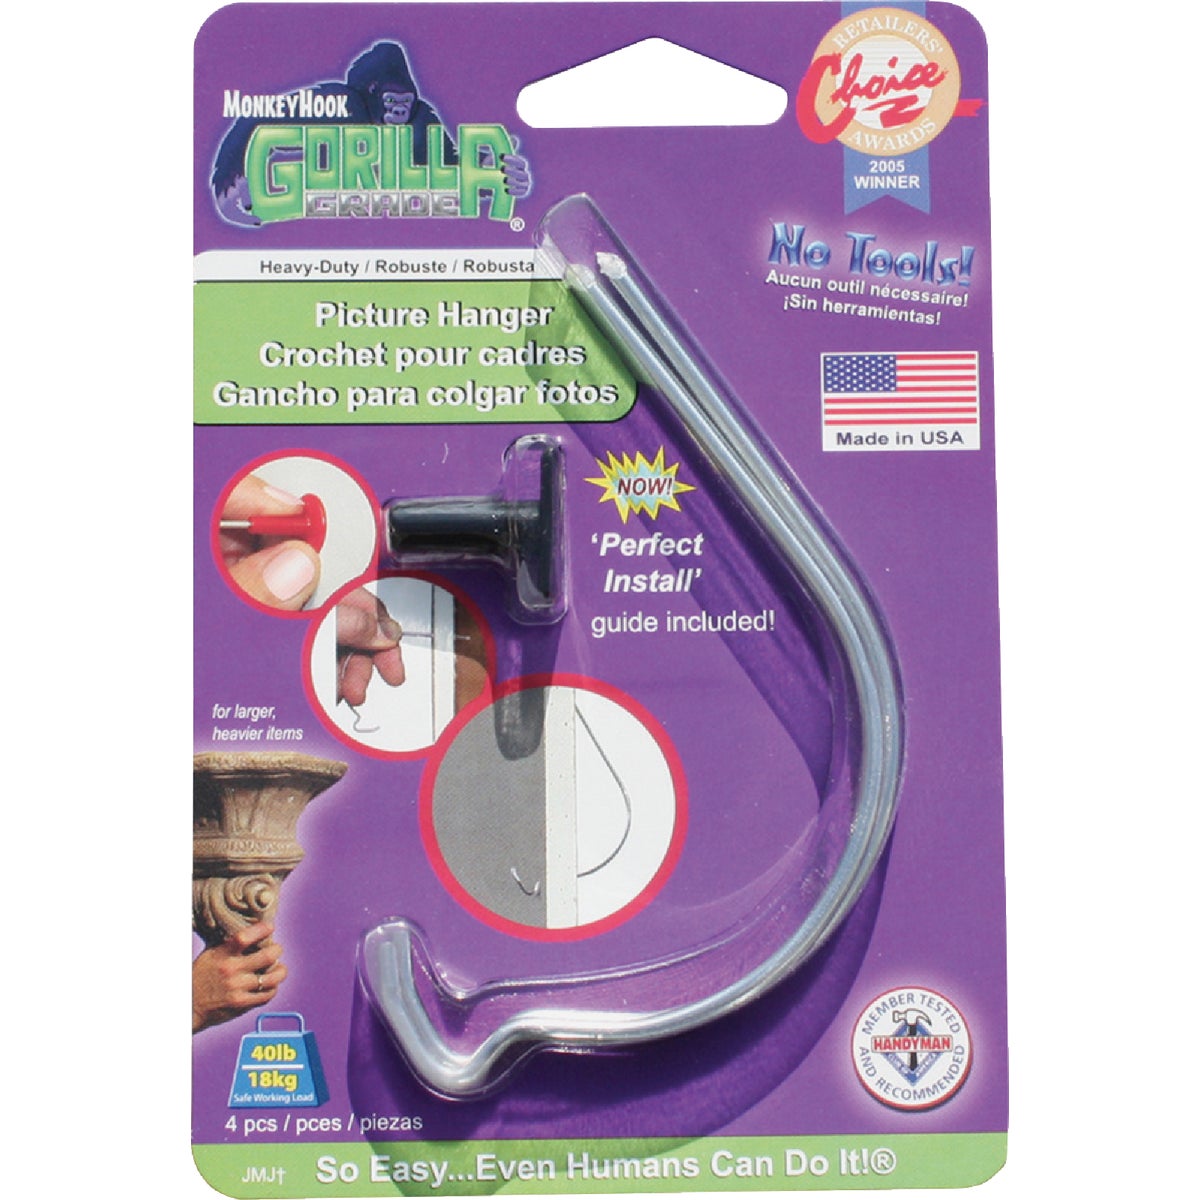 Monkey Hook Gorilla Grade Hanger with Perfect Install Guide (2-Count)